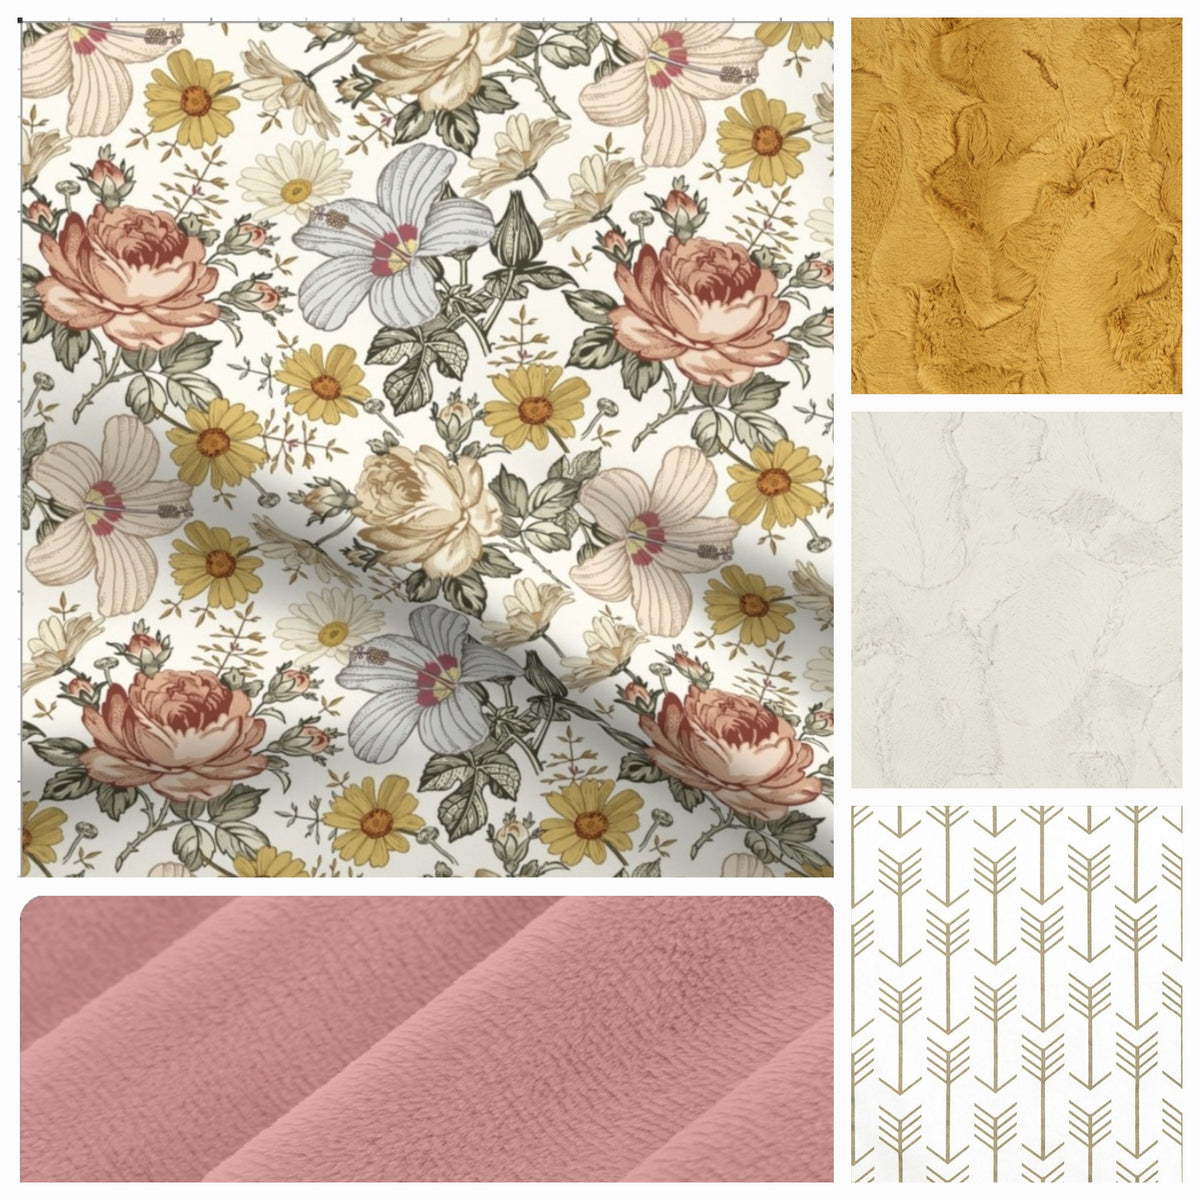 New Release Girl Crib Bedding- Vintage Boho Floral Rose Baby Bedding Collection - DBC Baby Bedding Co 